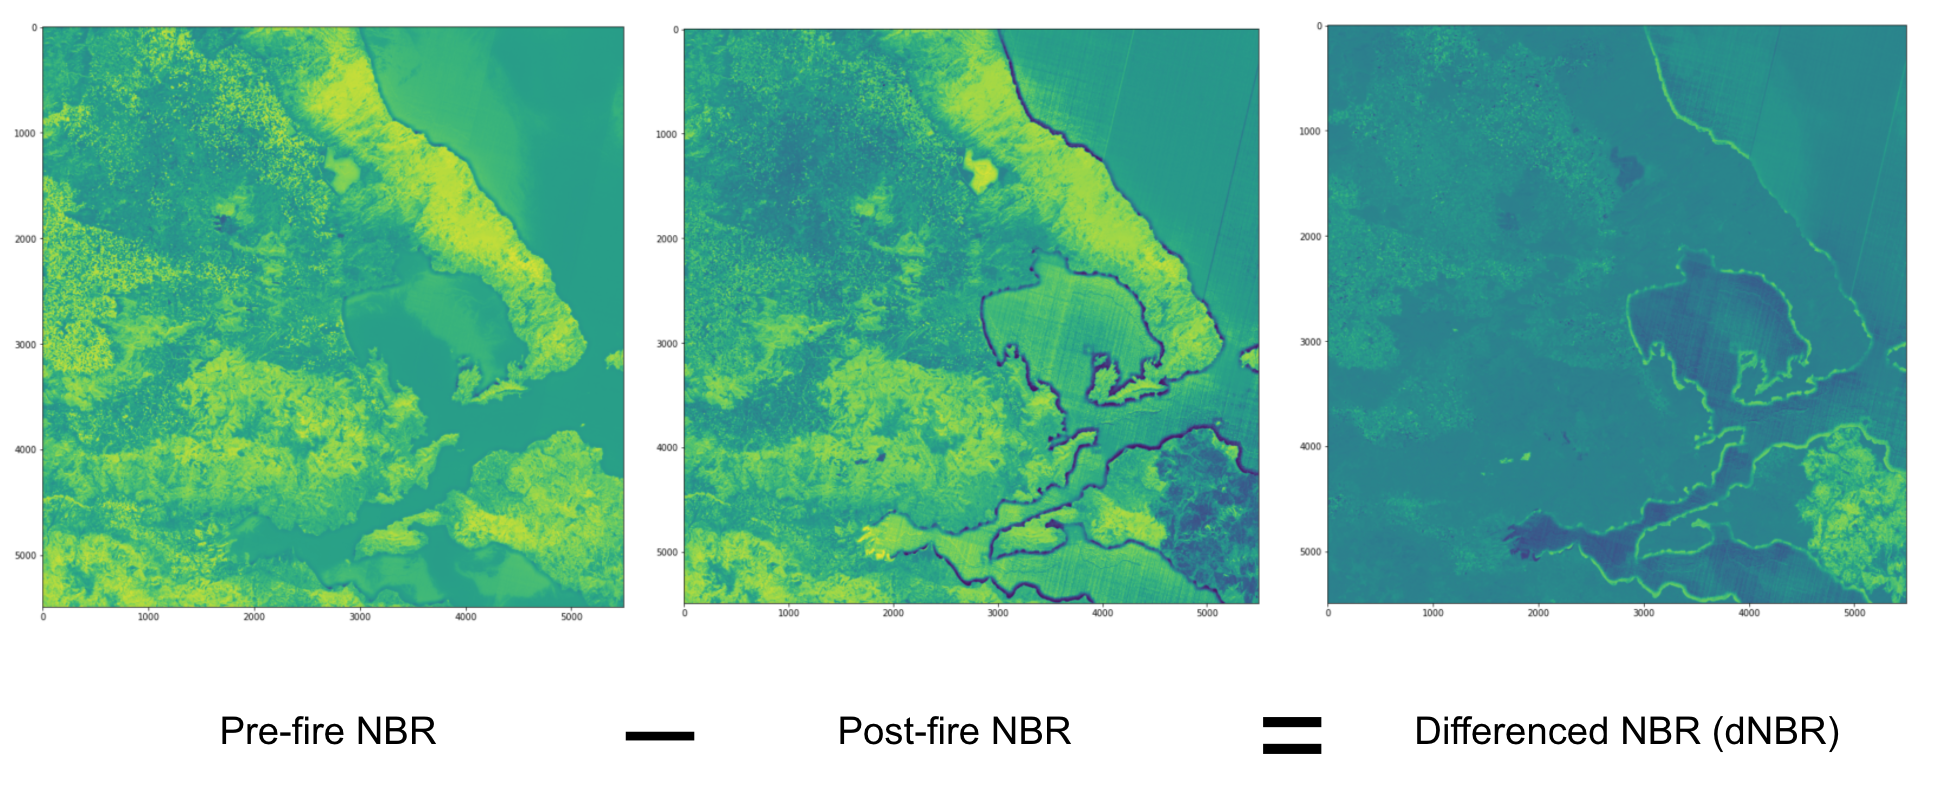 Figure 4. The Differenced Normalised Burn Ratio (dNBR) image (right) is calculated from Sentinel-2 Level 2A data by subtracting the pre-fire NBR on 1 August 2021 (left) from the post-fire NBR on 25 September 2021 (middle).